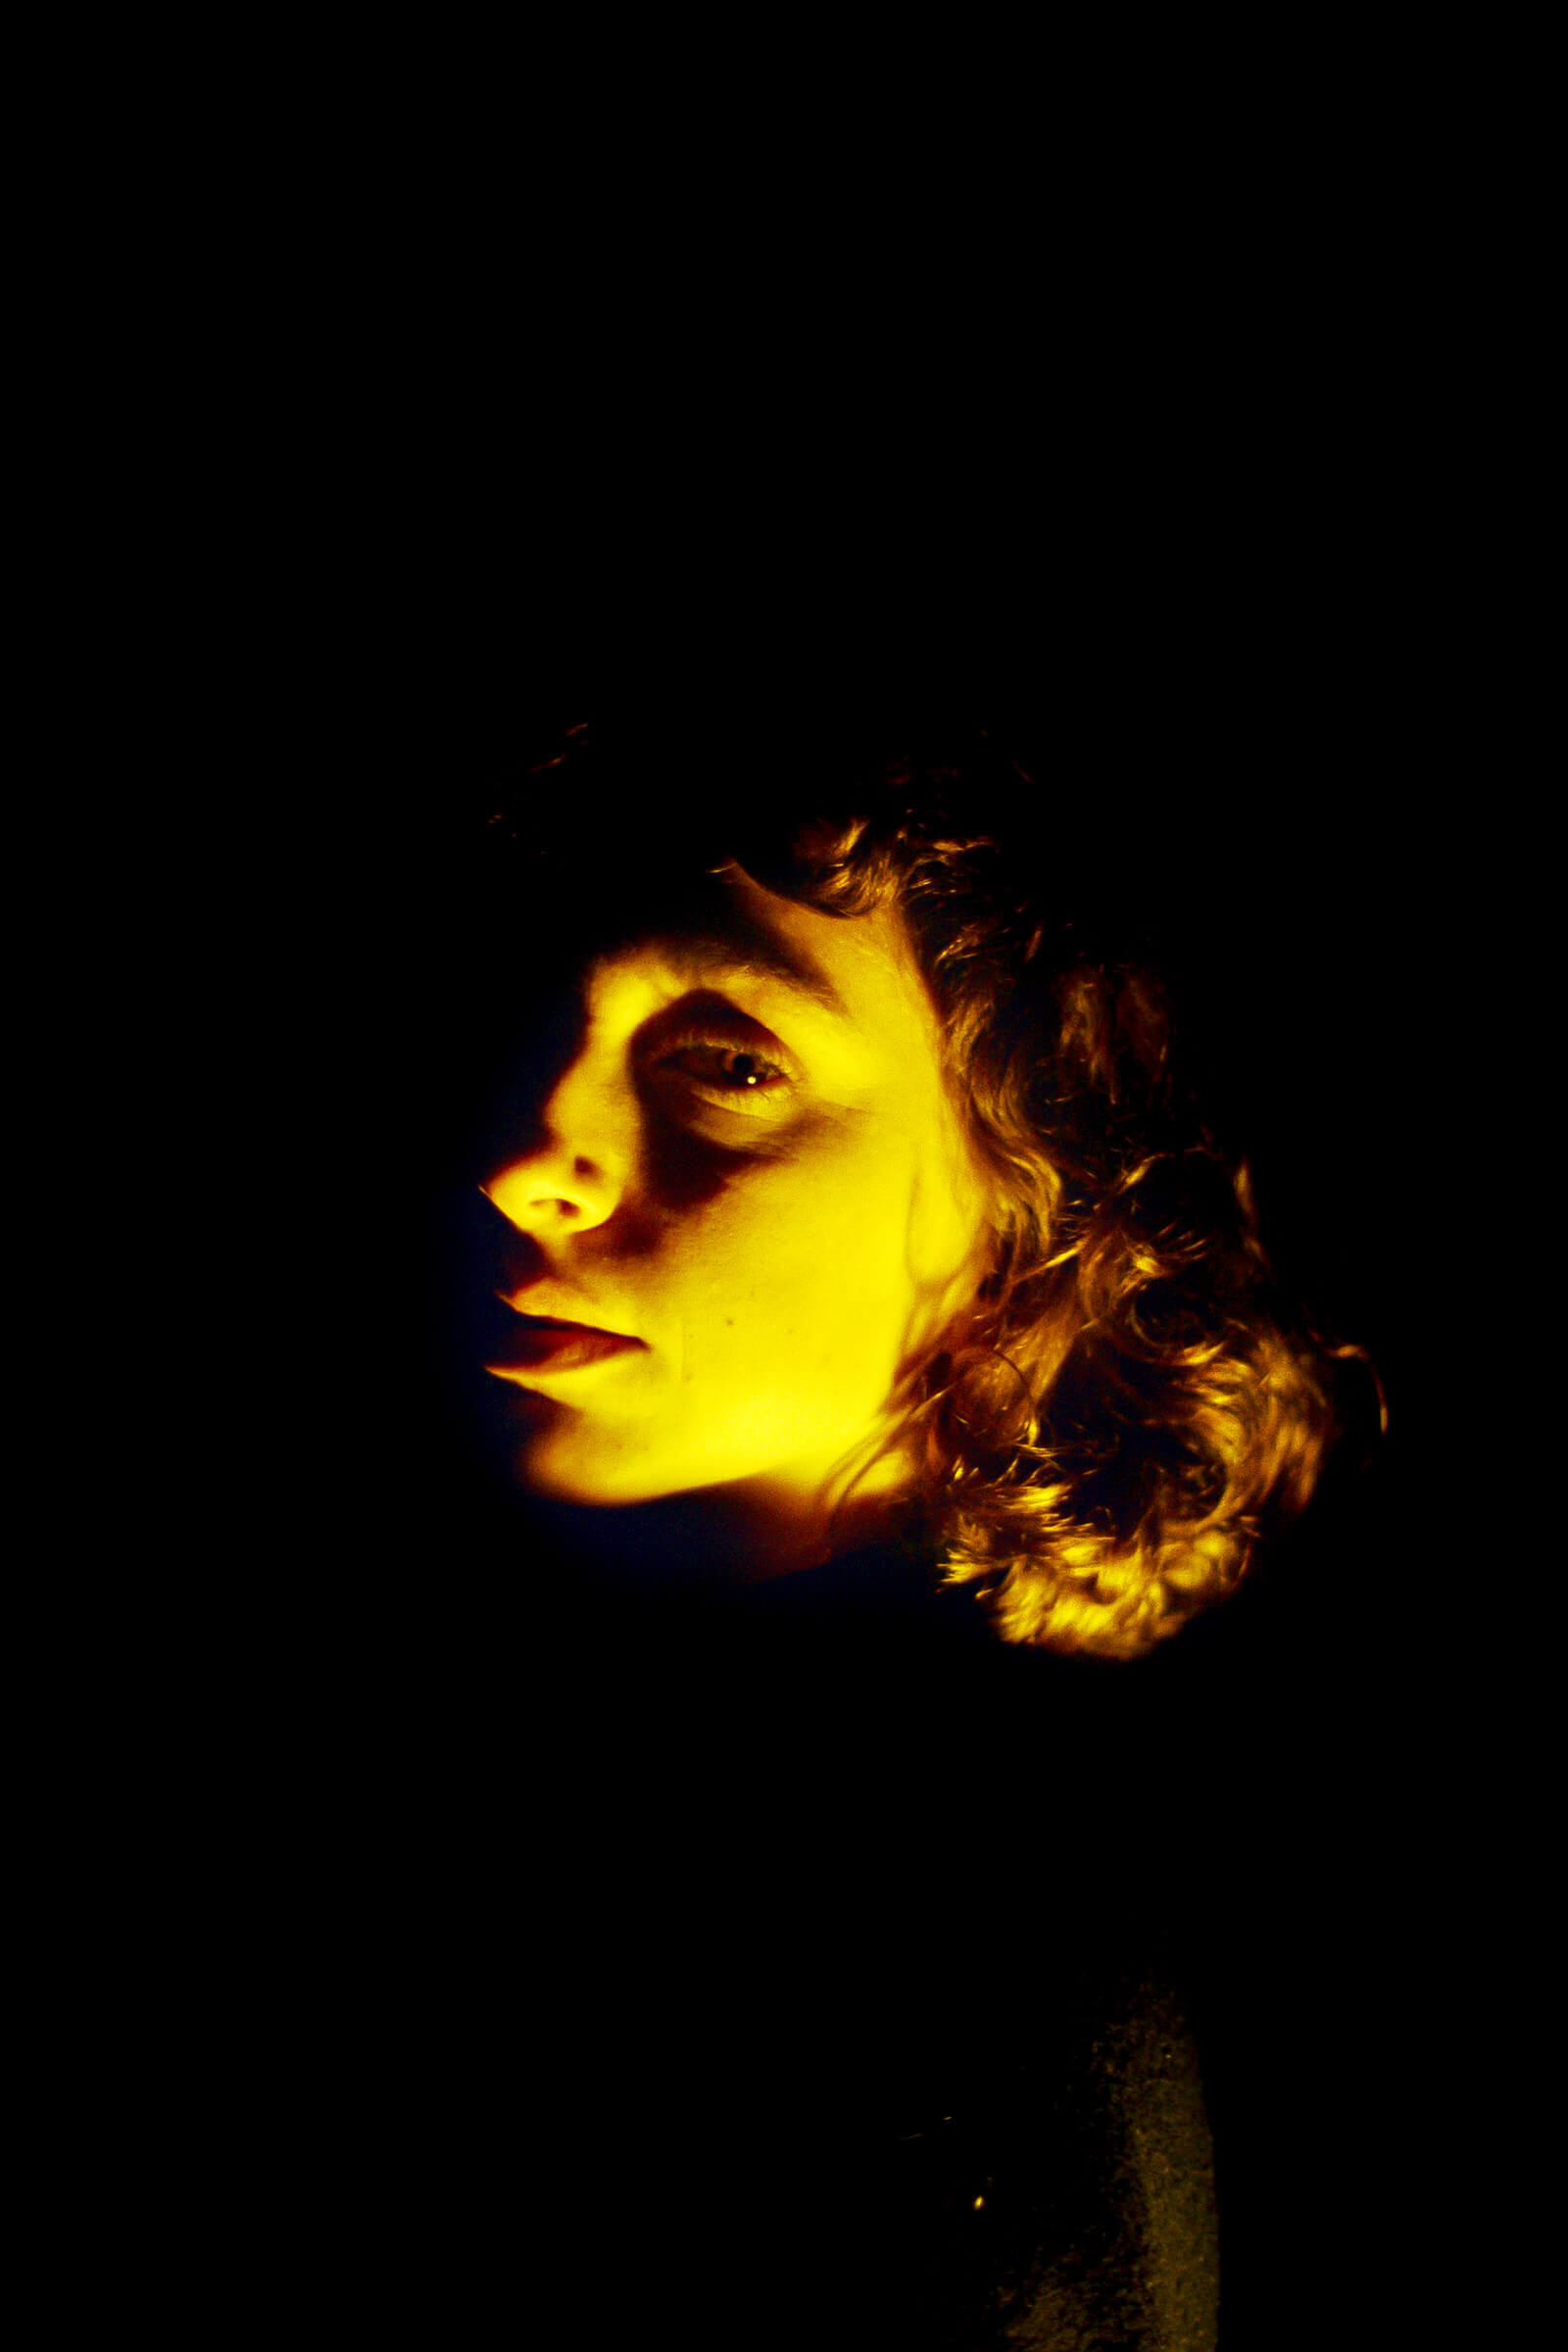 Model looking at the camera, dark background, yellow light on their face